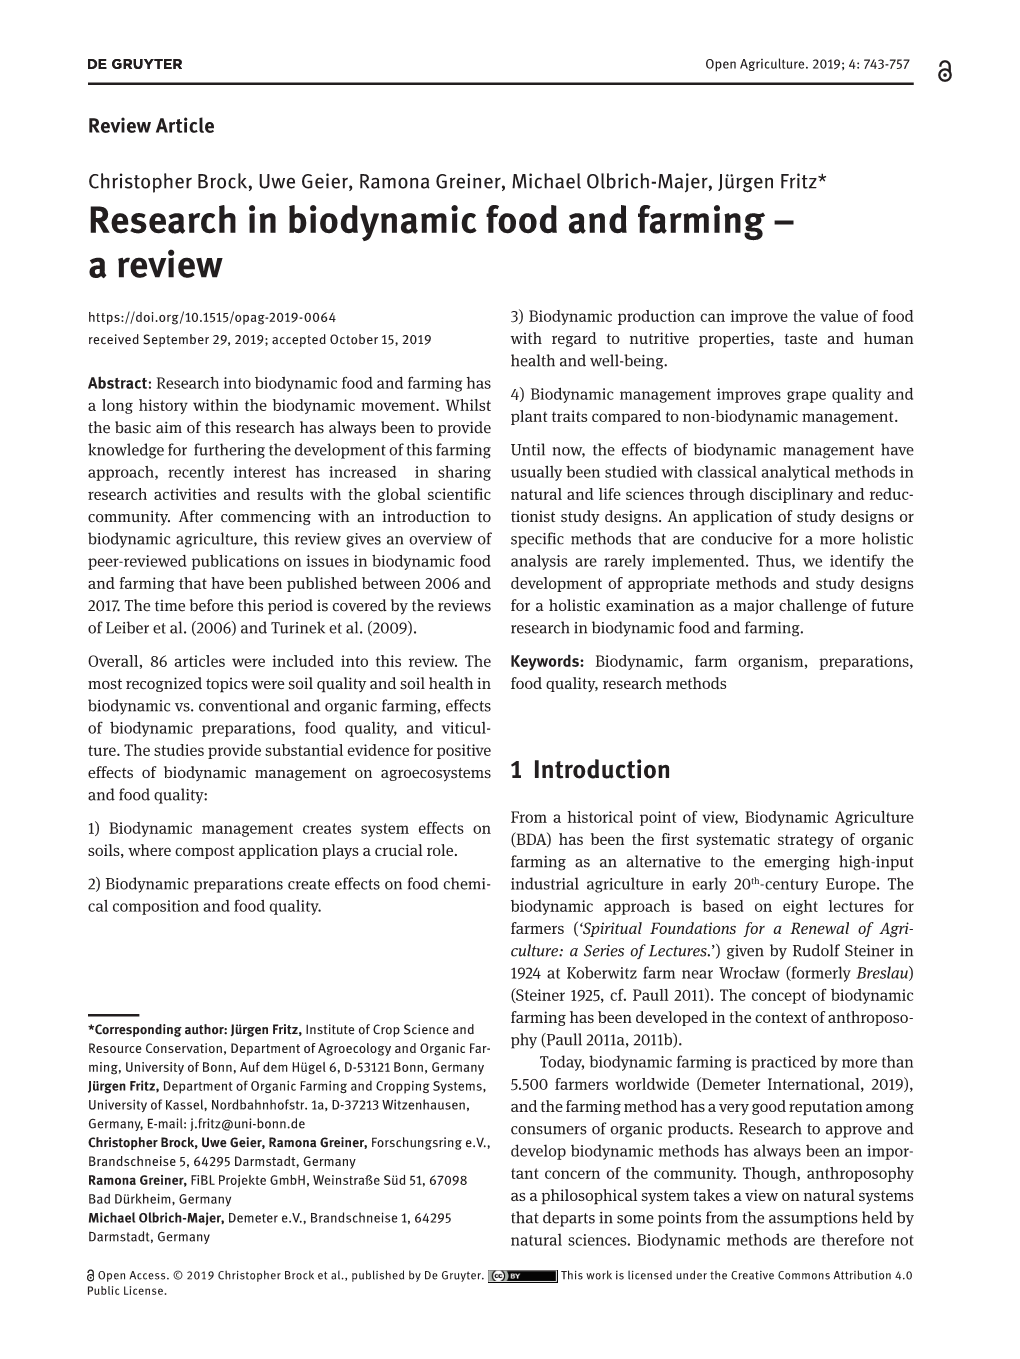 Research in Biodynamic Food and Farming